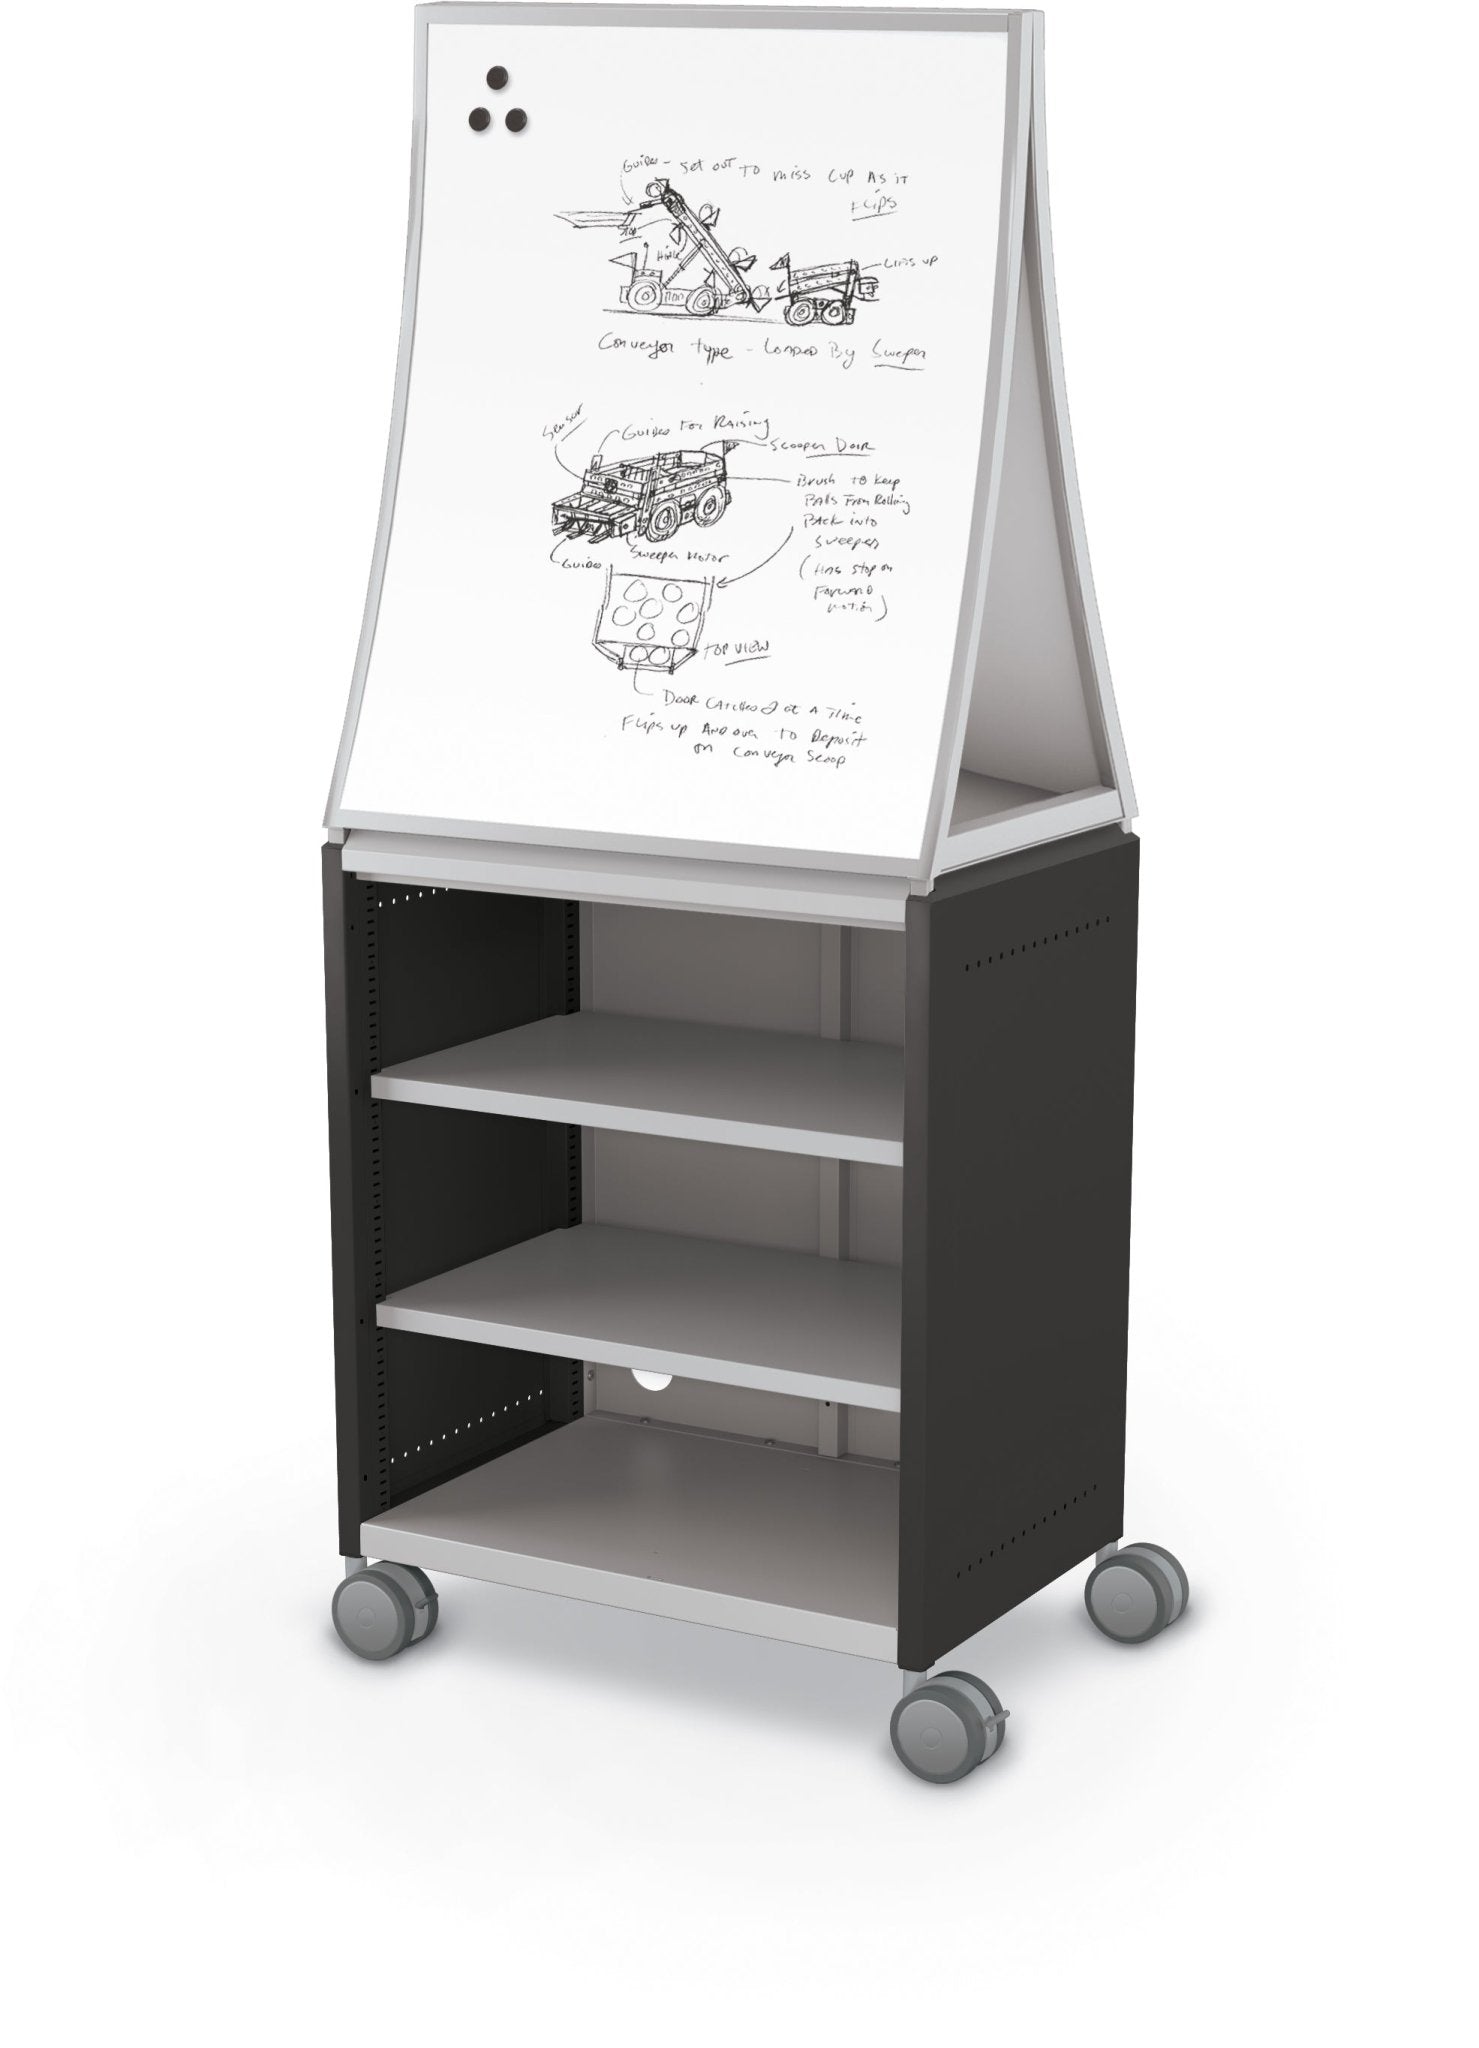 Mooreco Compass Cabinet Midi H2 Standard Back and Side Panels - No Doors with Shelves, Casters and Ogee Board (MOR-B2A1X1D1B0) - SchoolOutlet